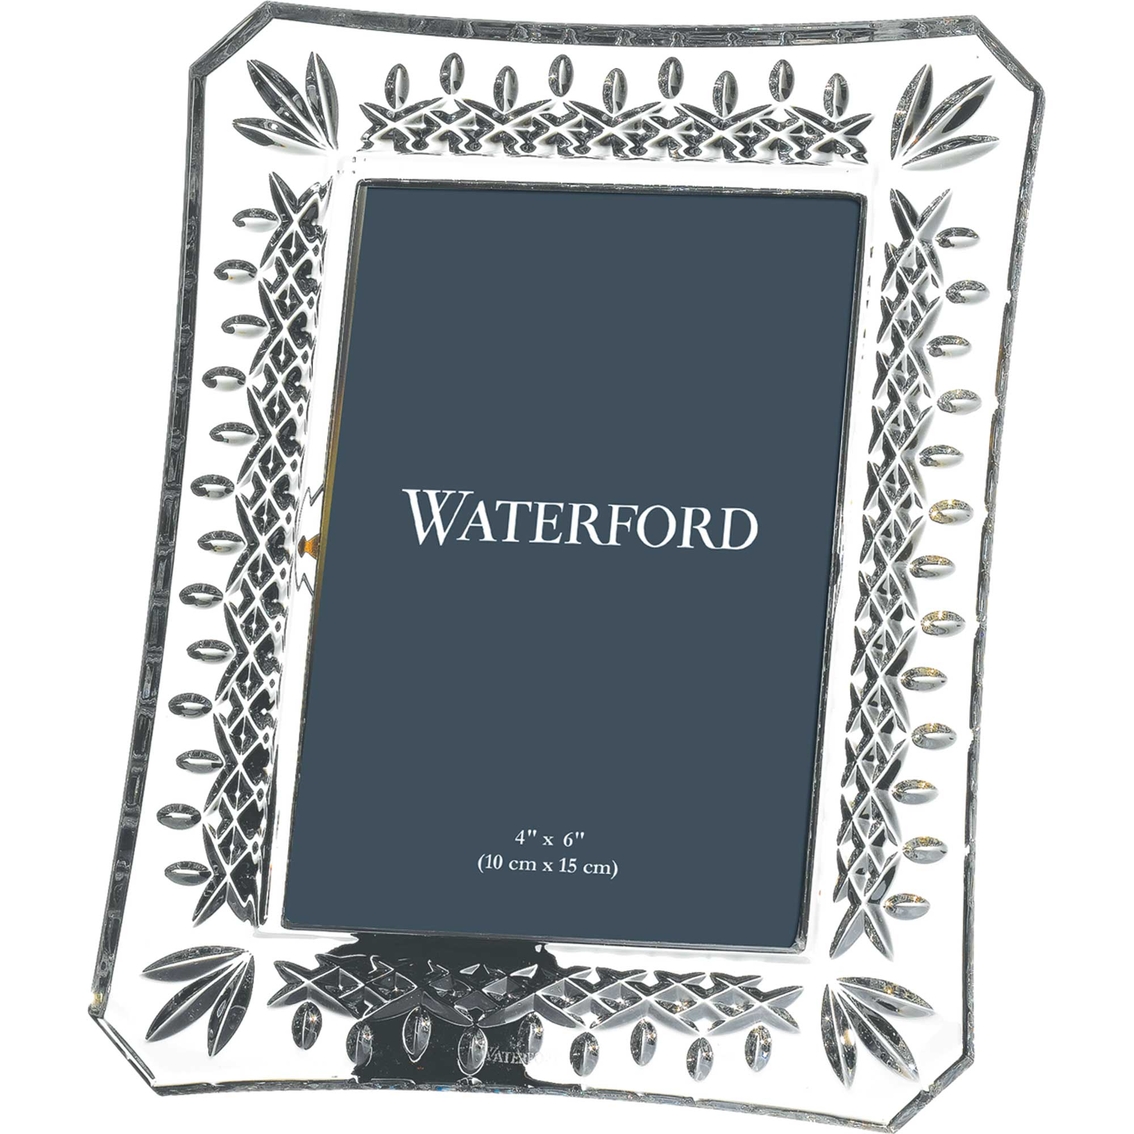 Waterford Lismore Frame 4X6 in.